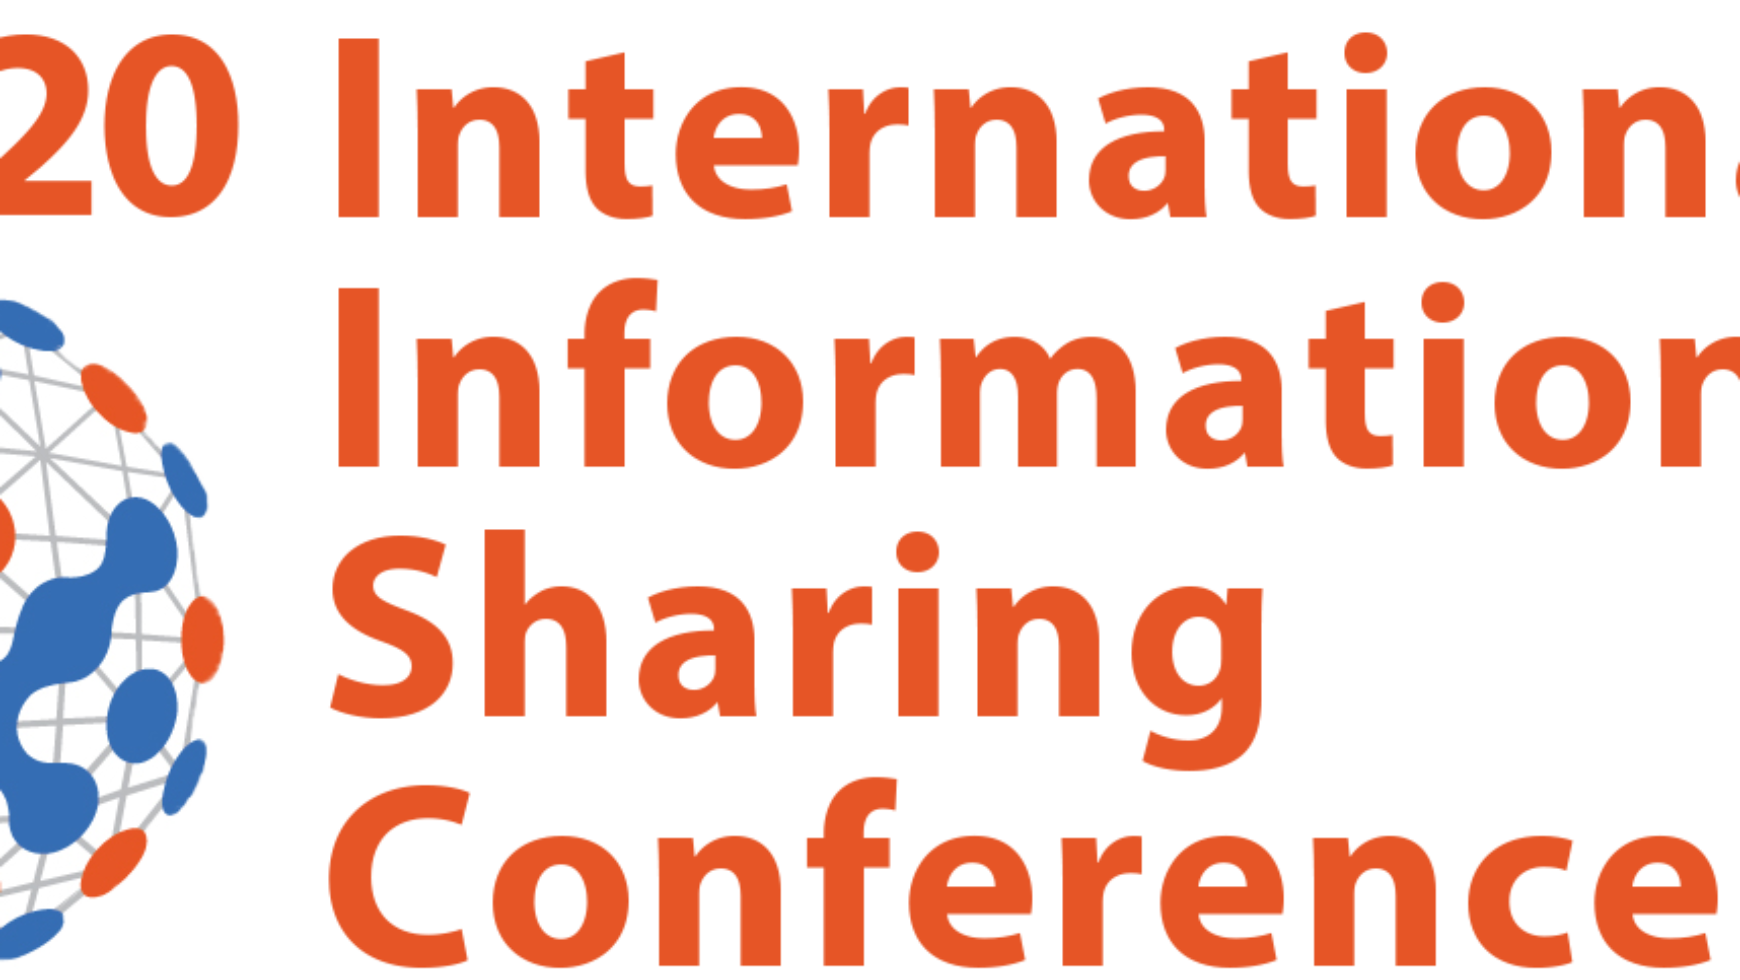 4th Annual International Information Sharing Conference